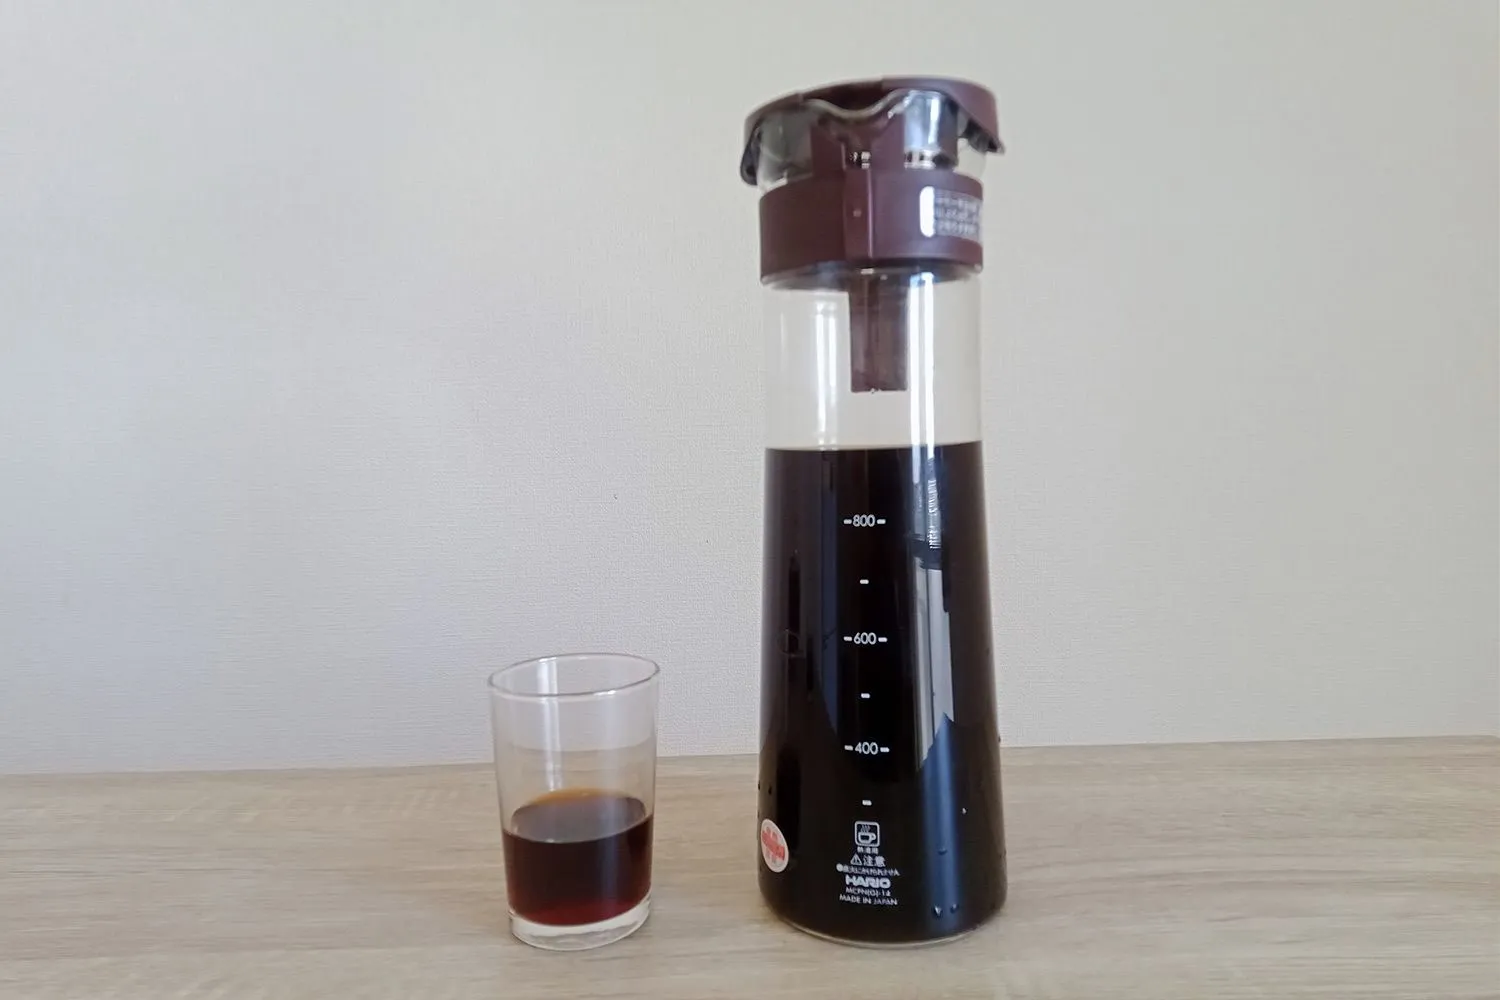 https://cdn.healthykitchen101.com/reviews/images/coffee-makers/cl5uf8oiz0040sf88c7ncewnm.jpg